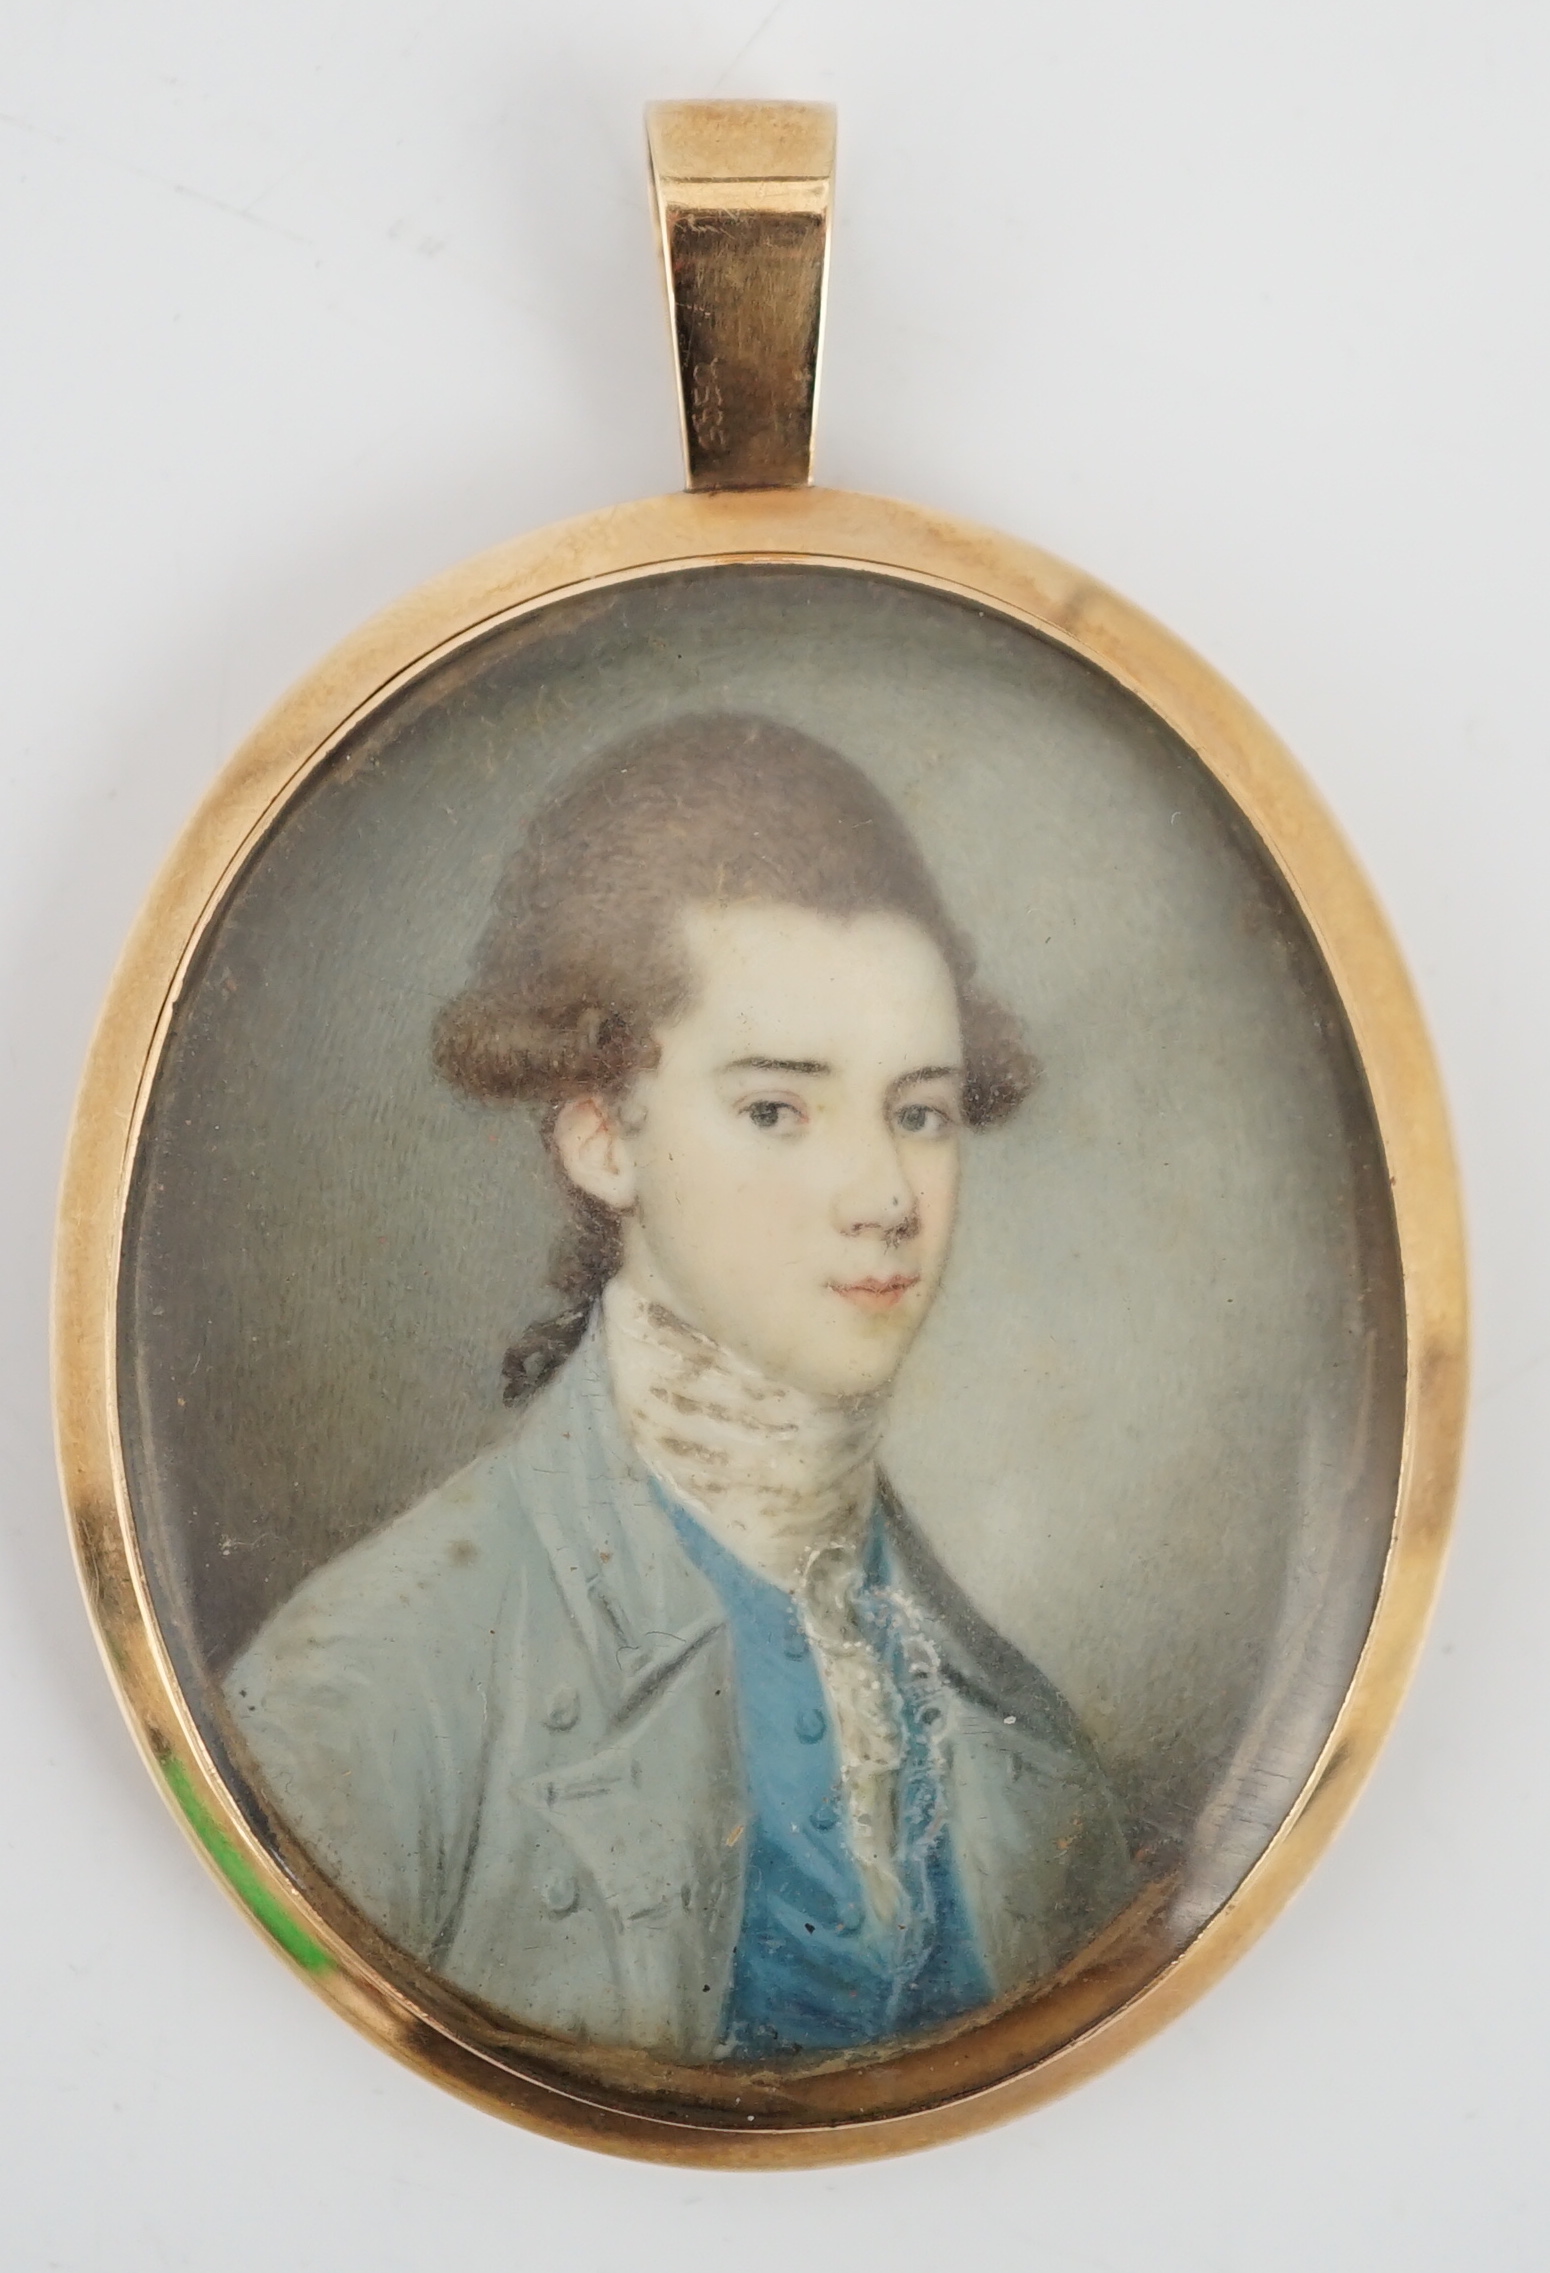 English School circa 1800, Portrait miniature of a young man, oil on ivory, 5.4 x 4.4cm. CITES Submission reference JKK4W6C4